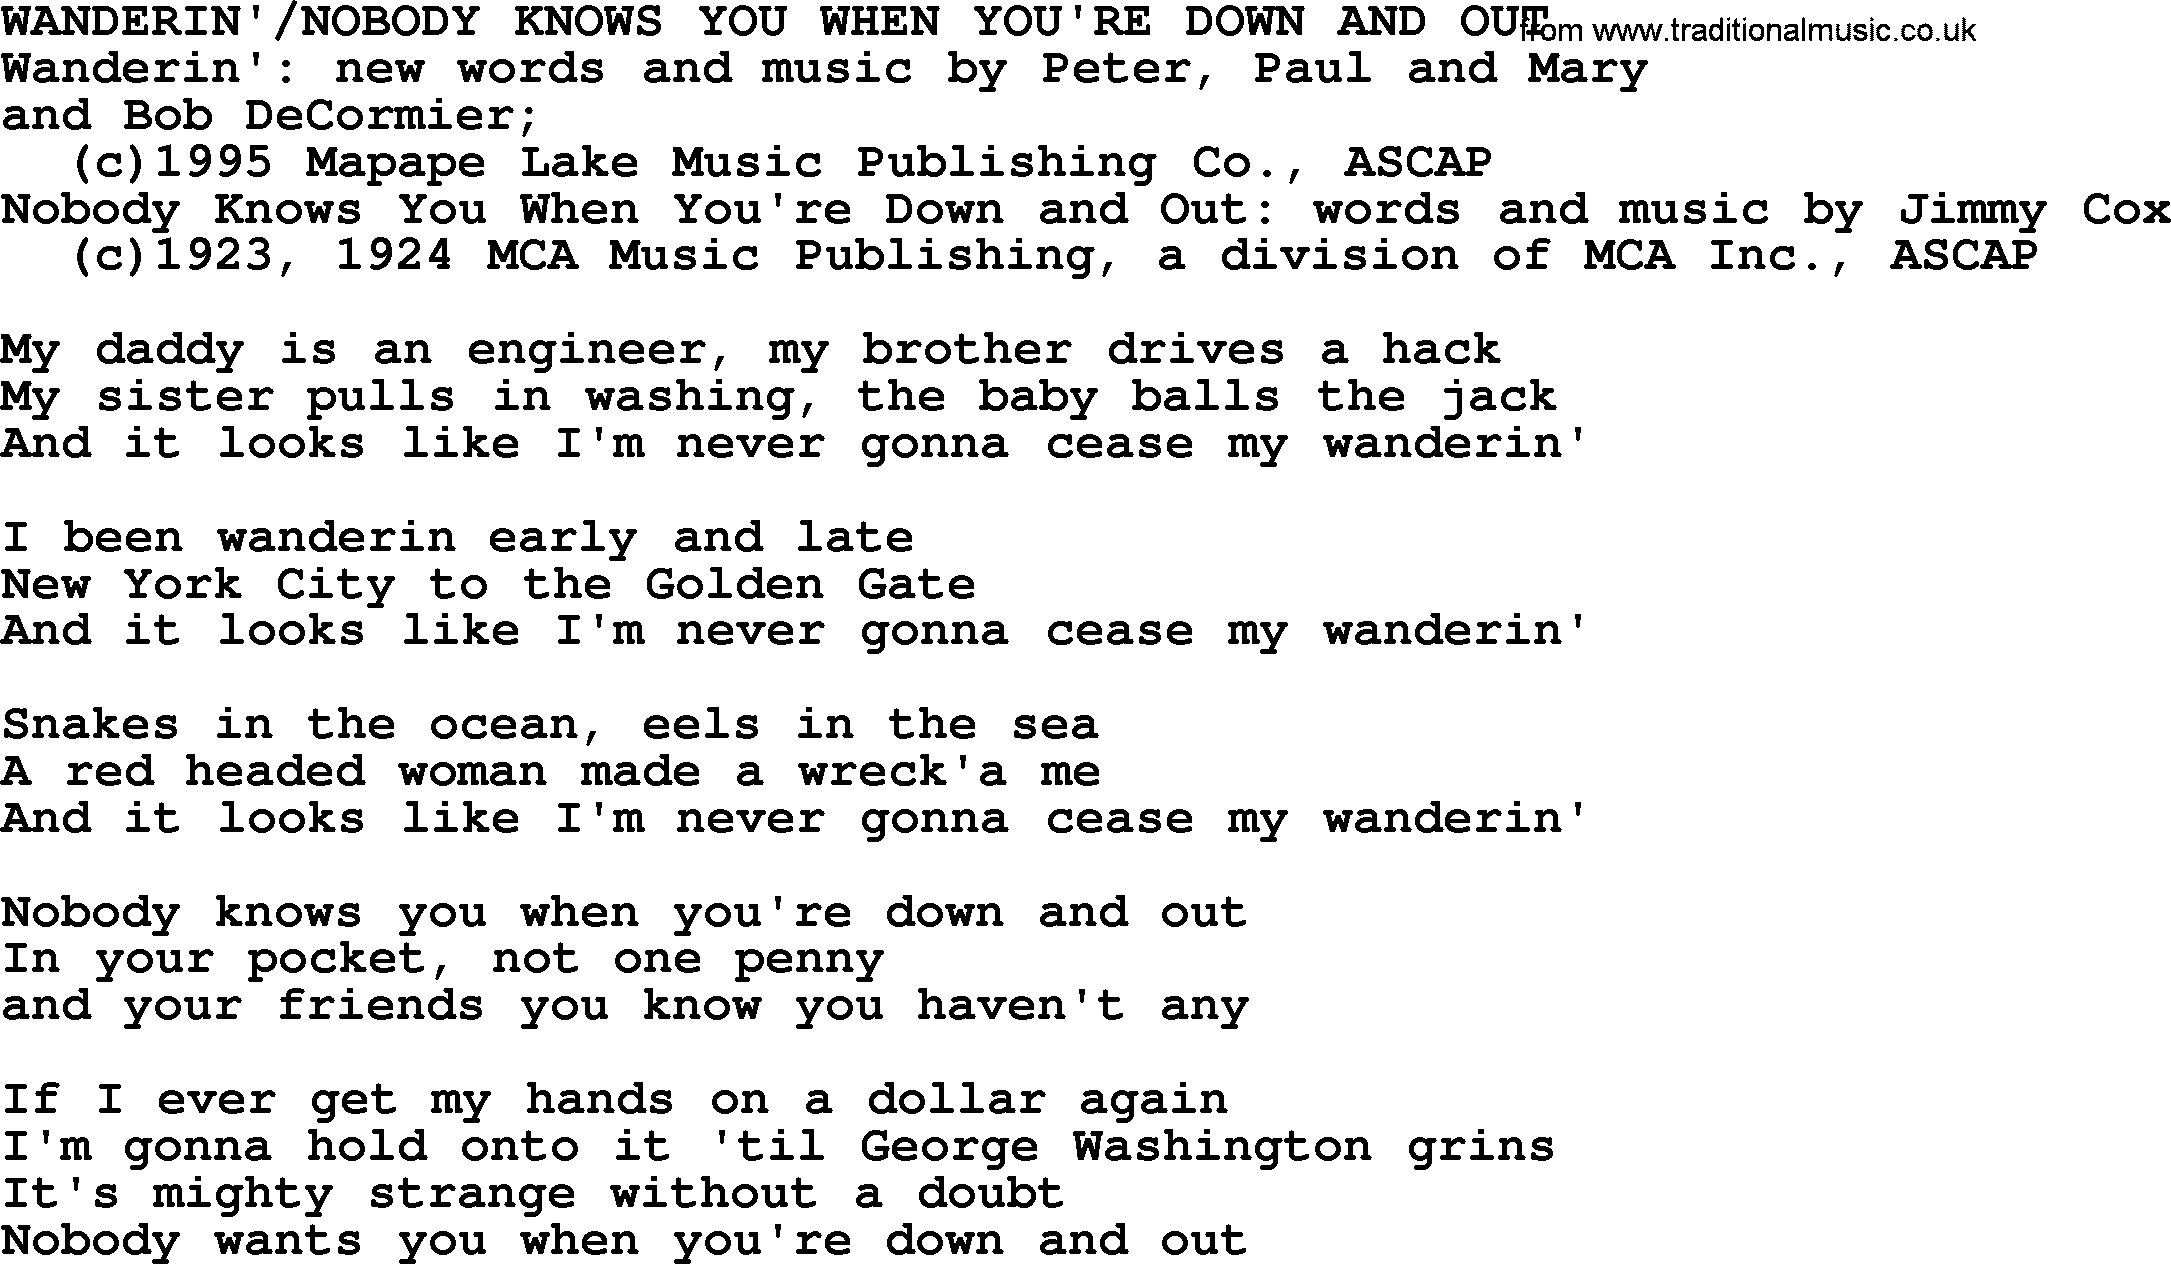 Peter, Paul and Mary song Wanderinnobody Knows You When Youre Down And Out lyrics